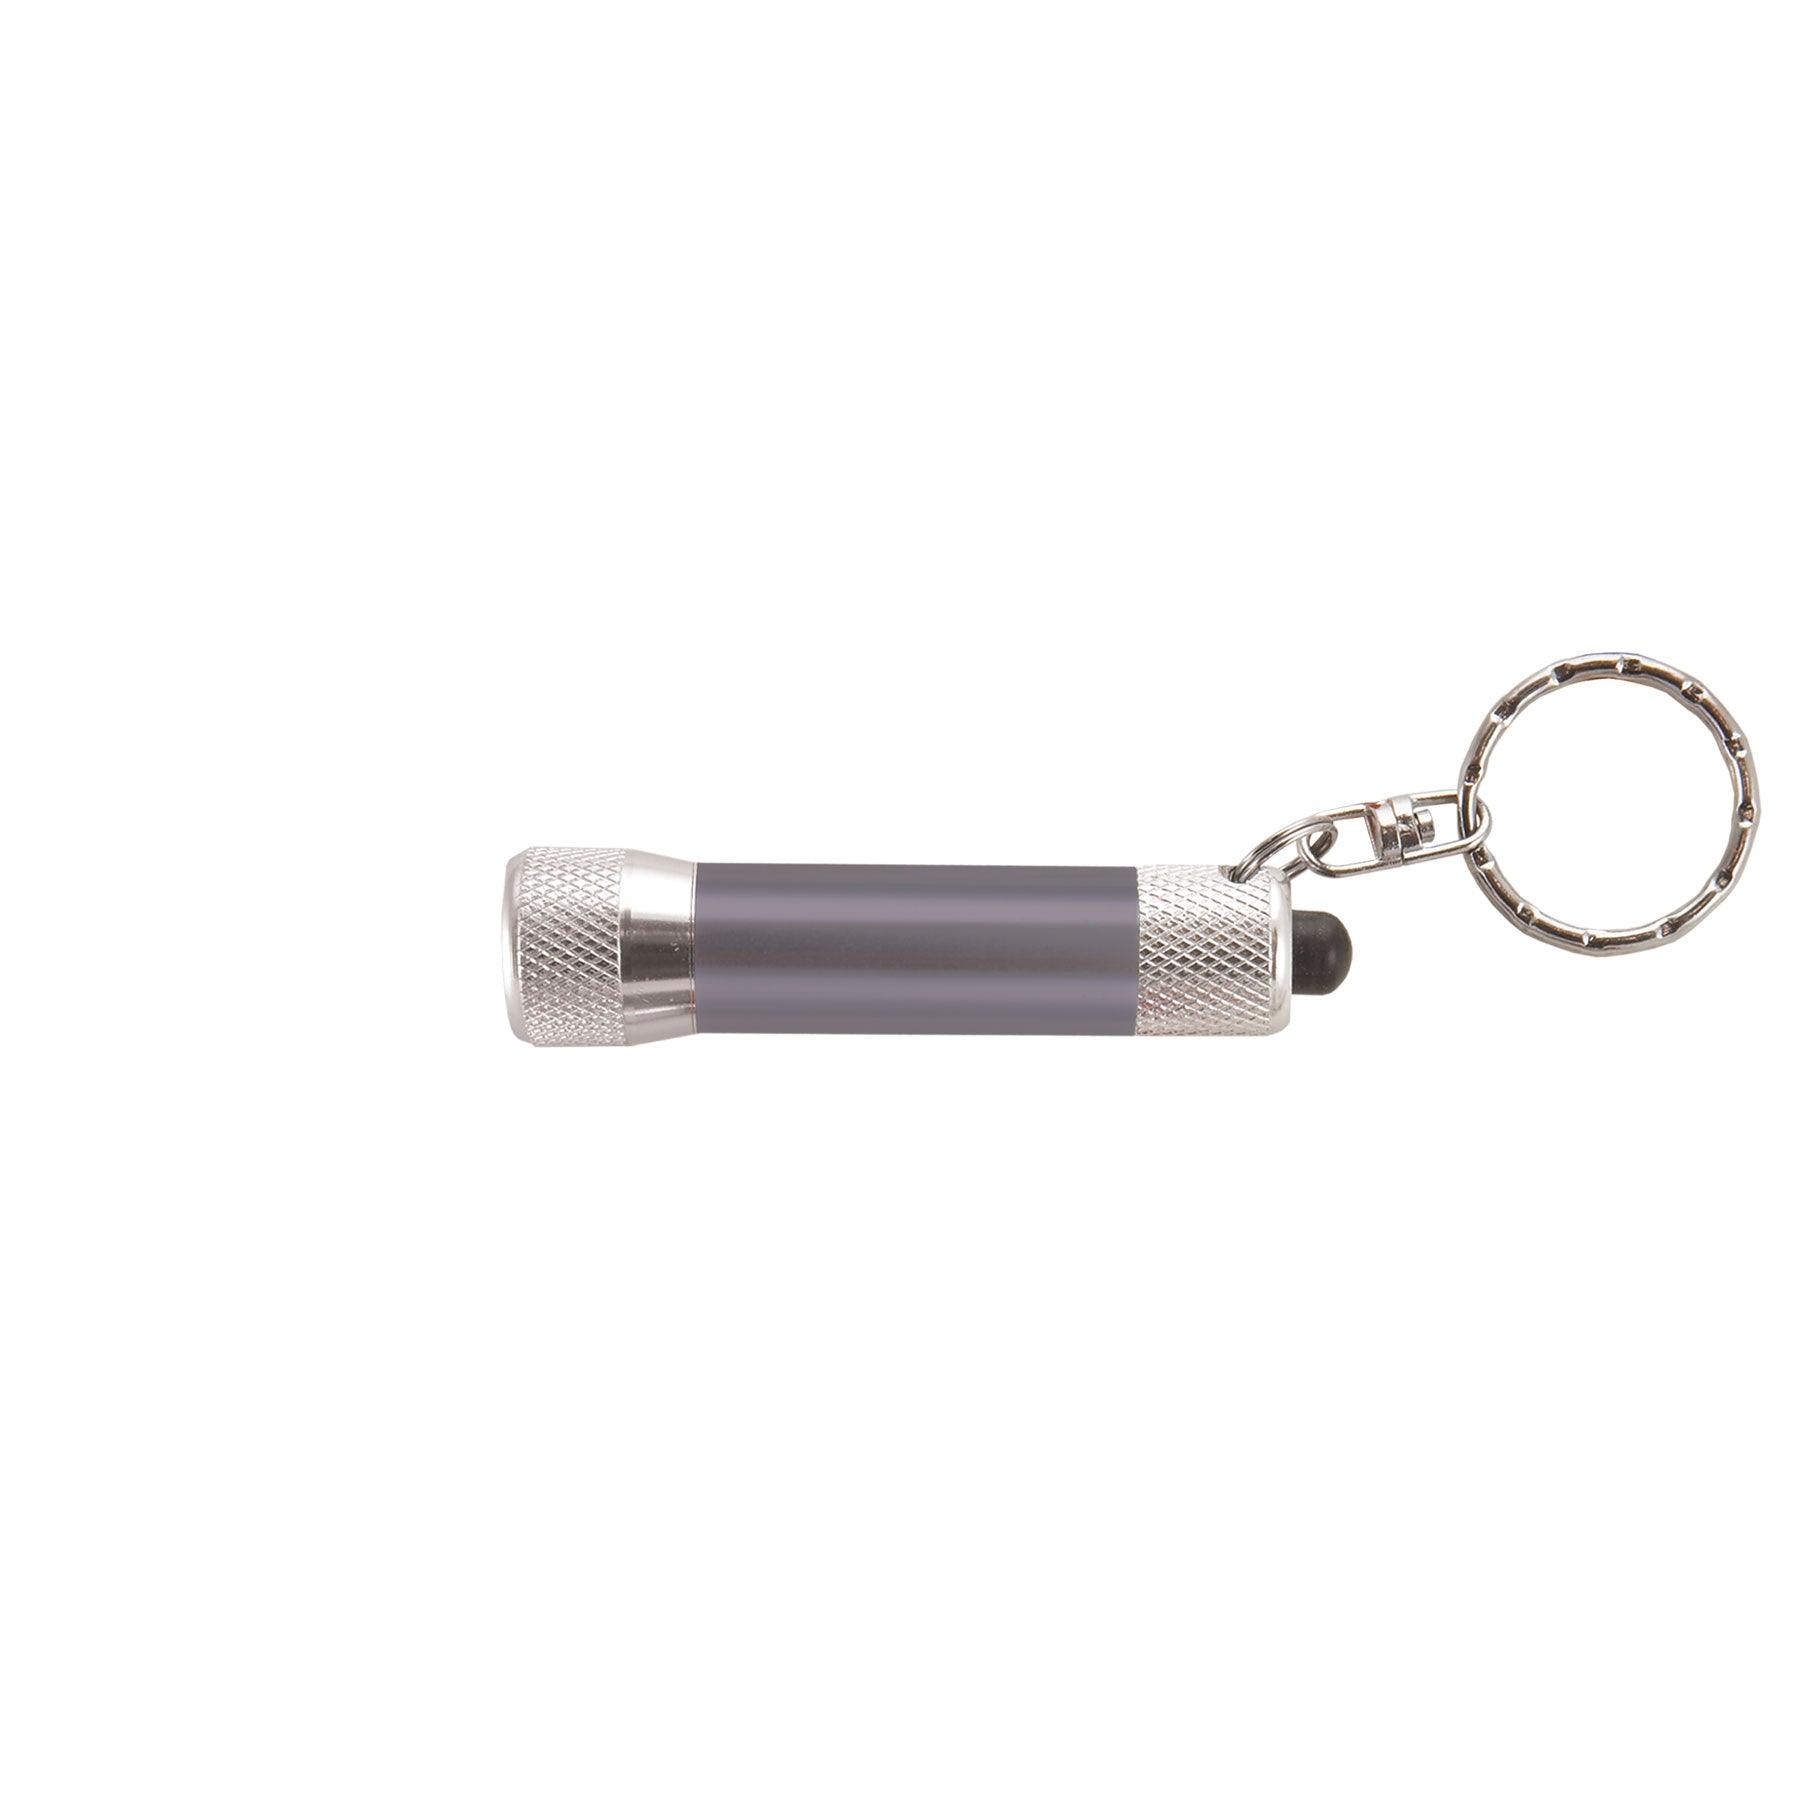 Taupe Promotional Led keychain - Persopens Promotional Products LTD